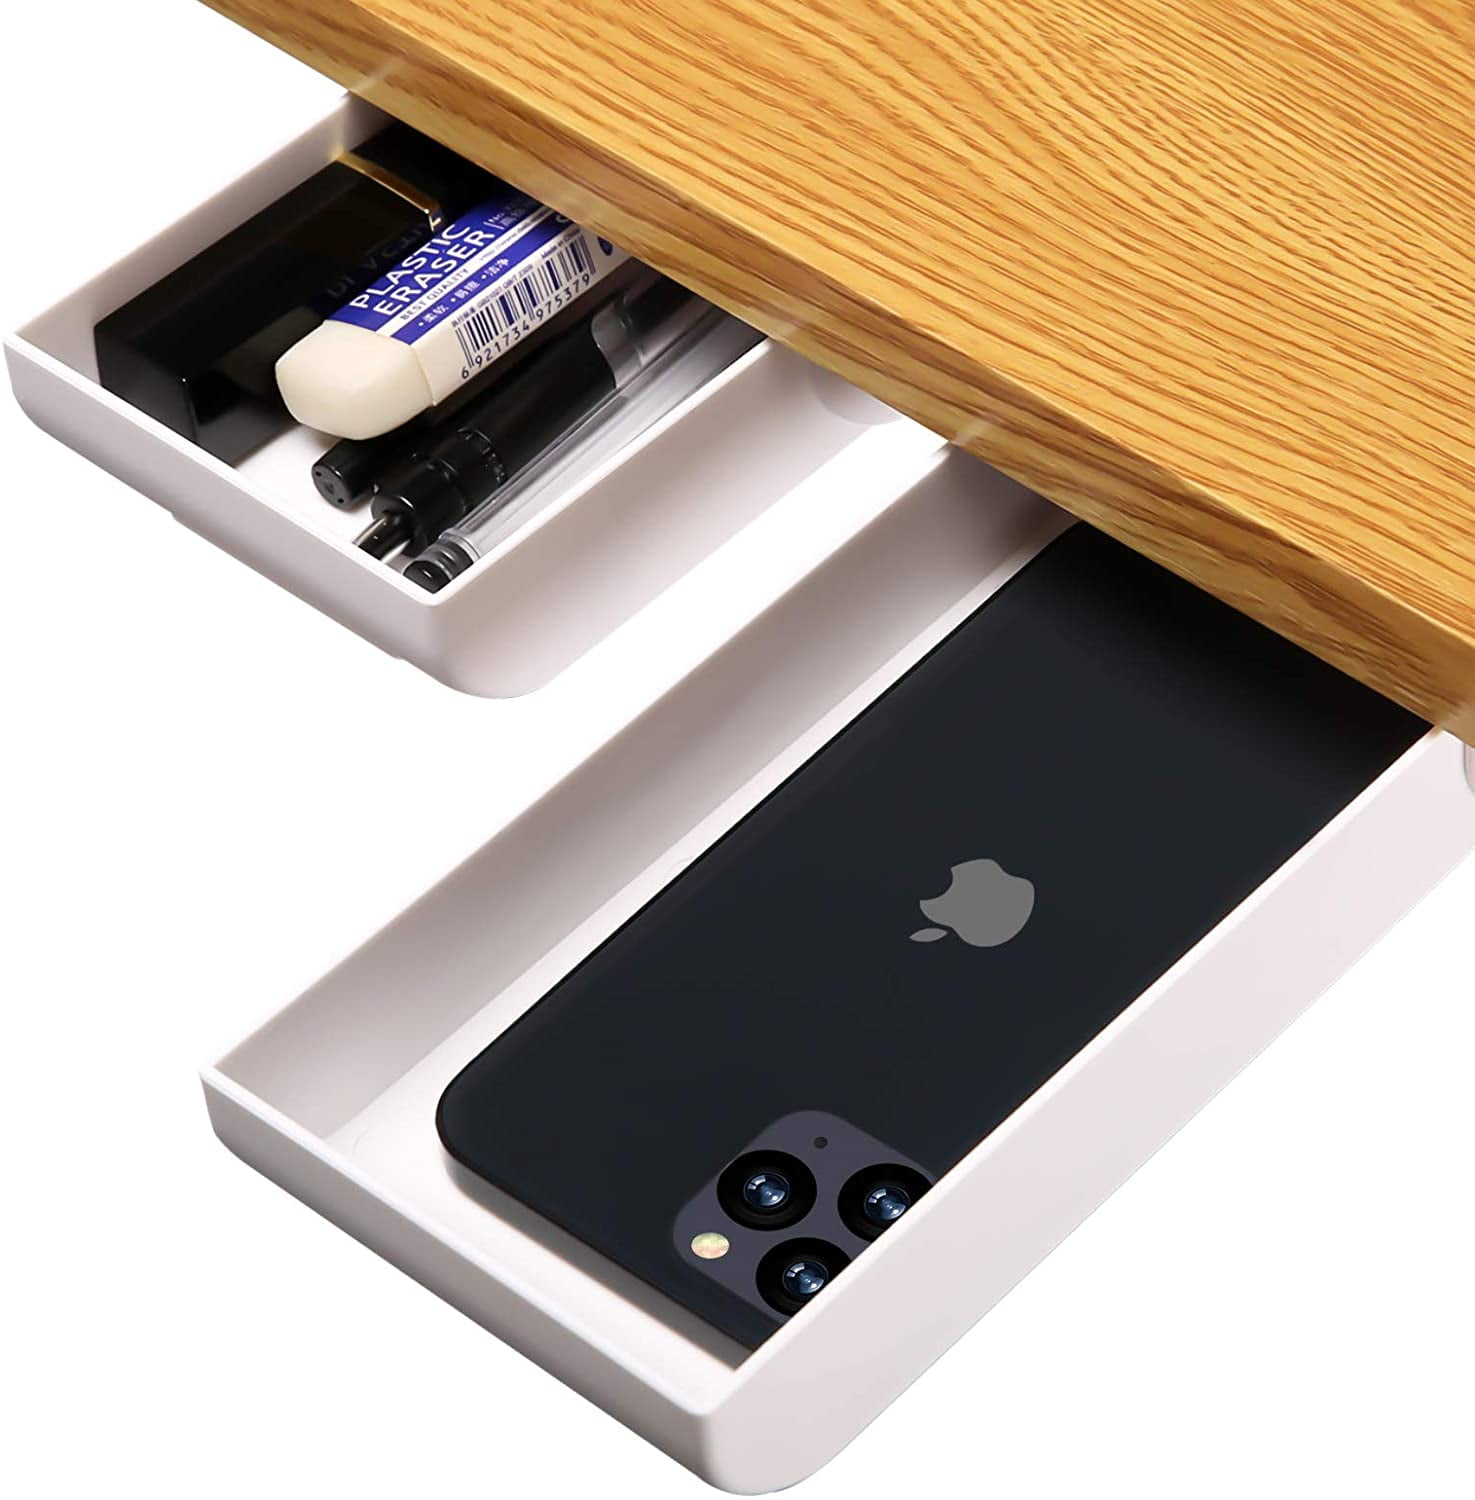 White 2pcs Hidden Hanging Paste Style Paste Drawer Storage Pen Case for Office School Home Desk Punch Free Under The Table Drawer